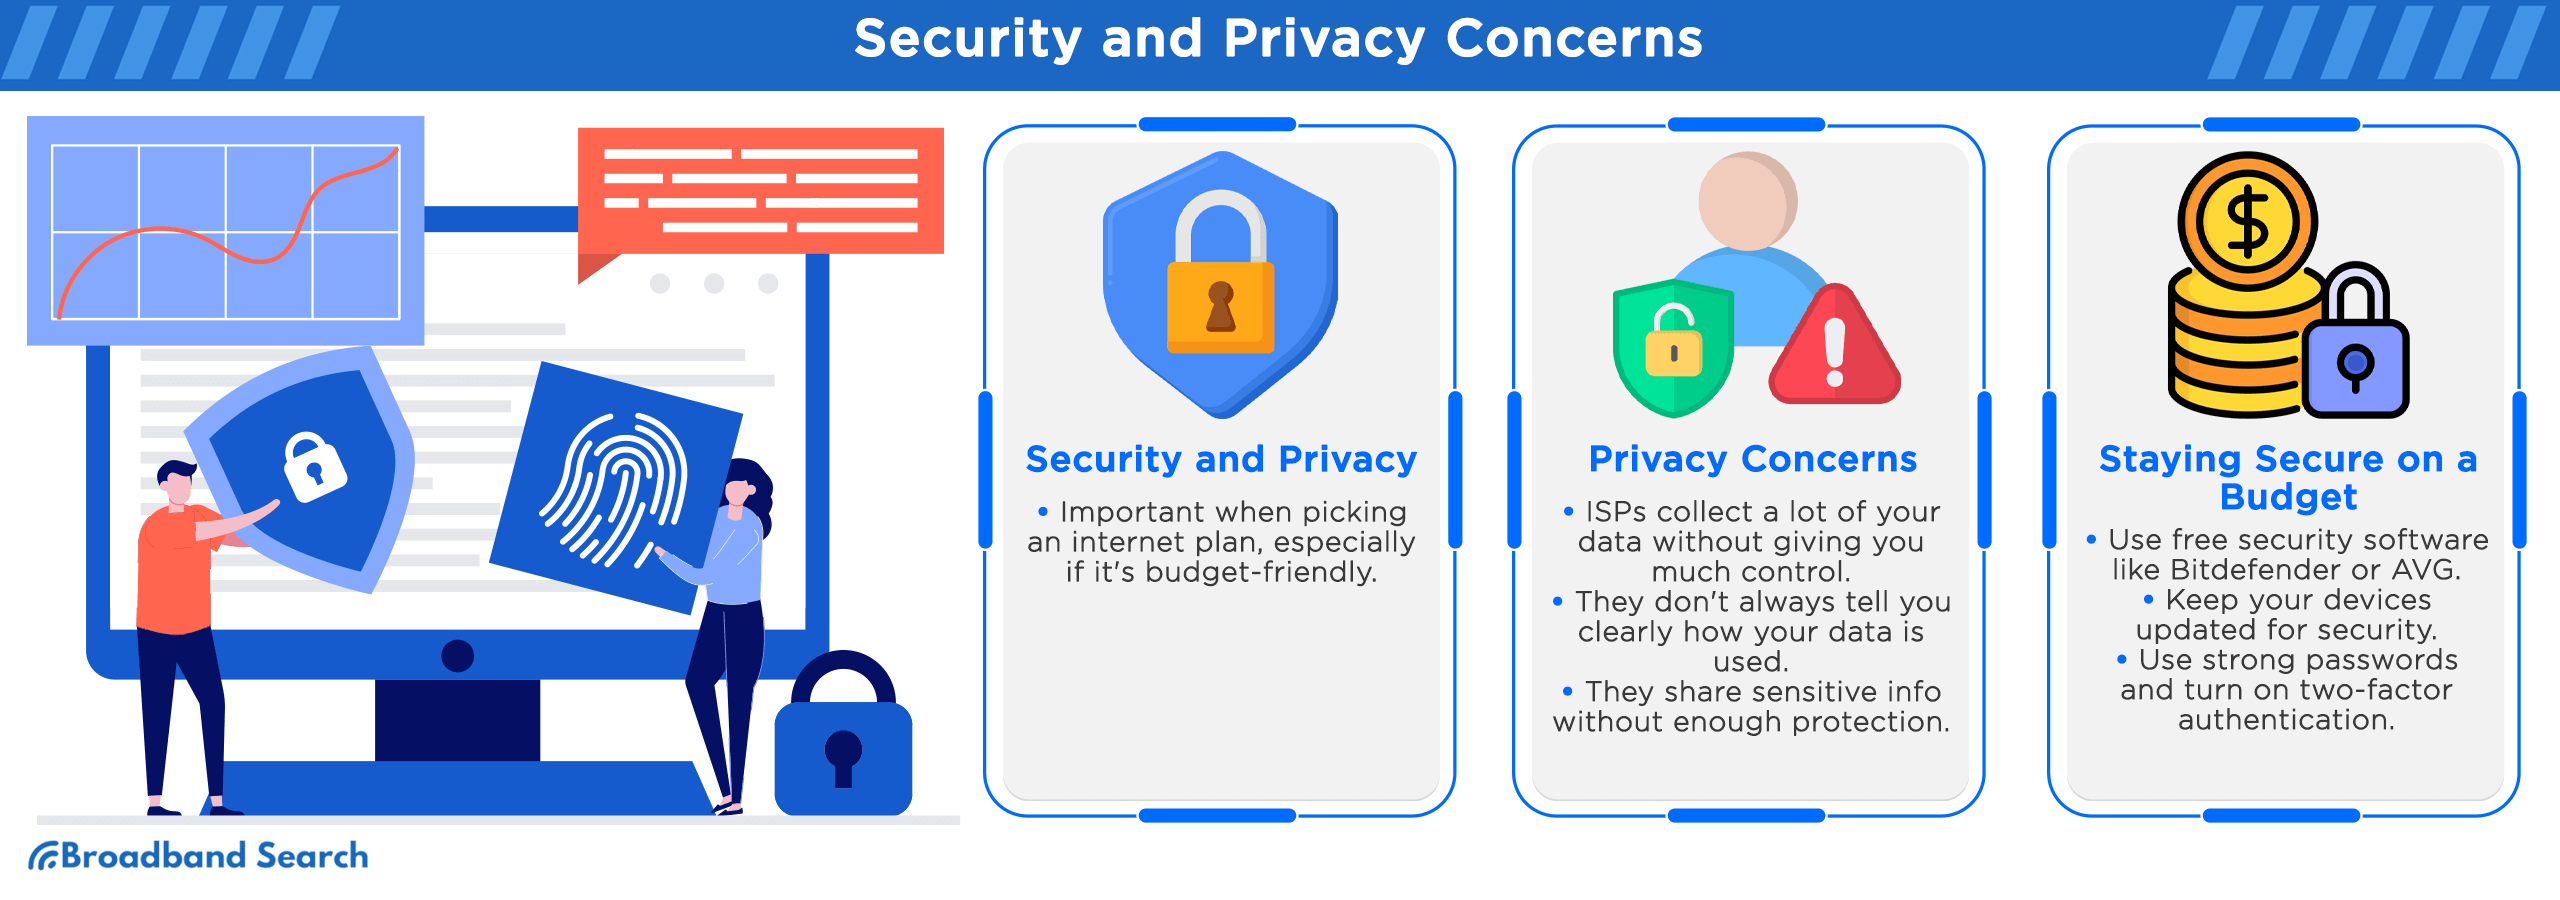 Security and privacy concerns